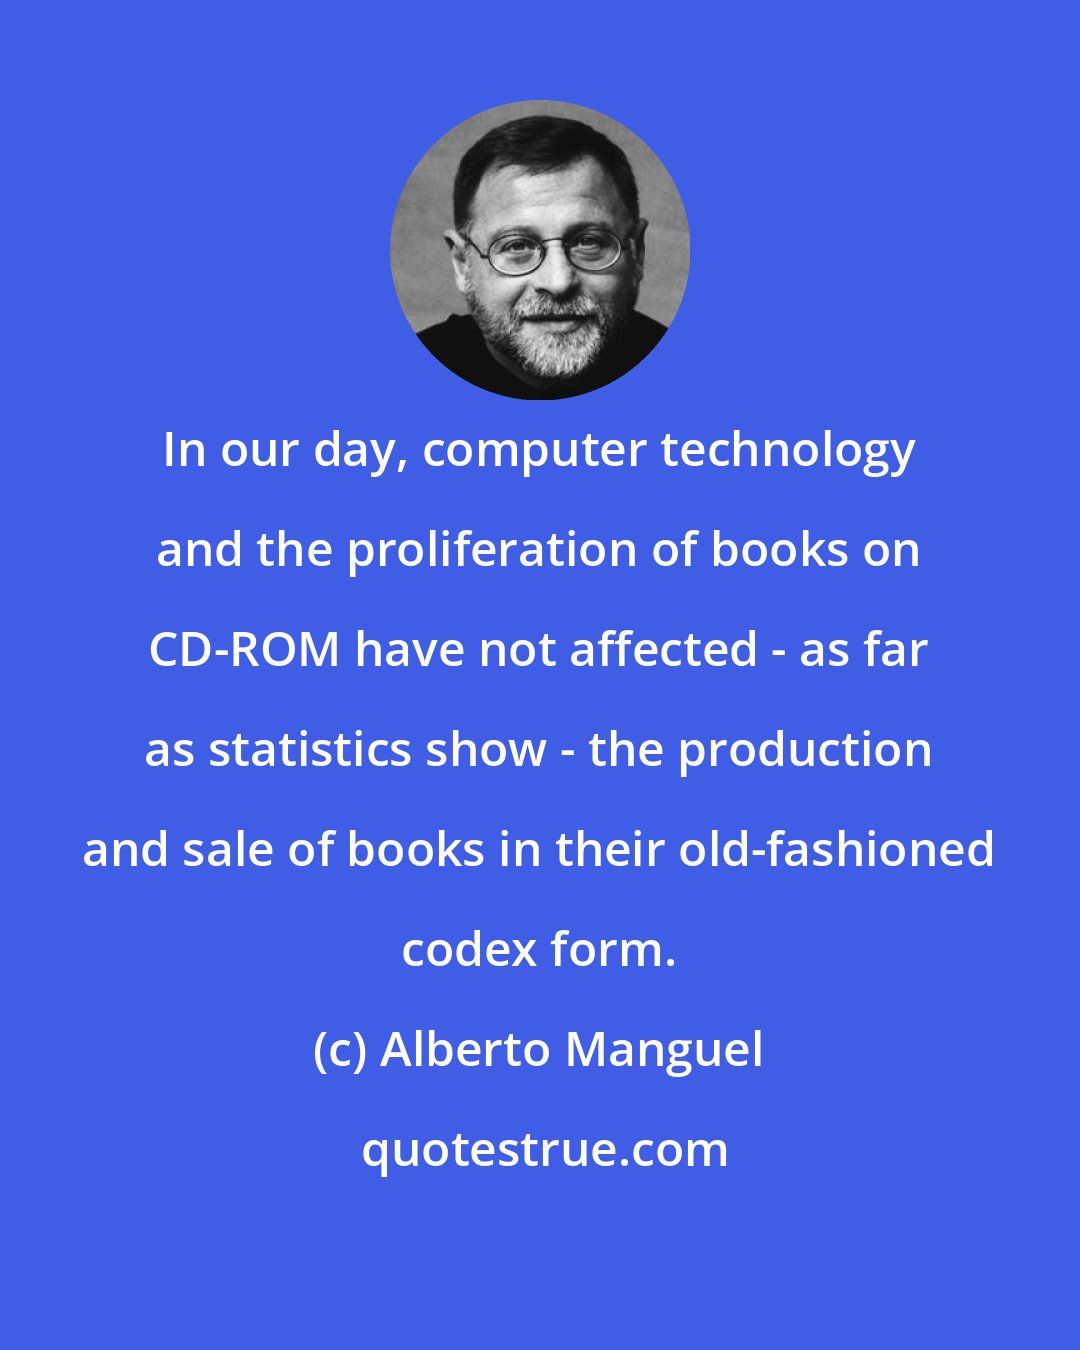 Alberto Manguel: In our day, computer technology and the proliferation of books on CD-ROM have not affected - as far as statistics show - the production and sale of books in their old-fashioned codex form.